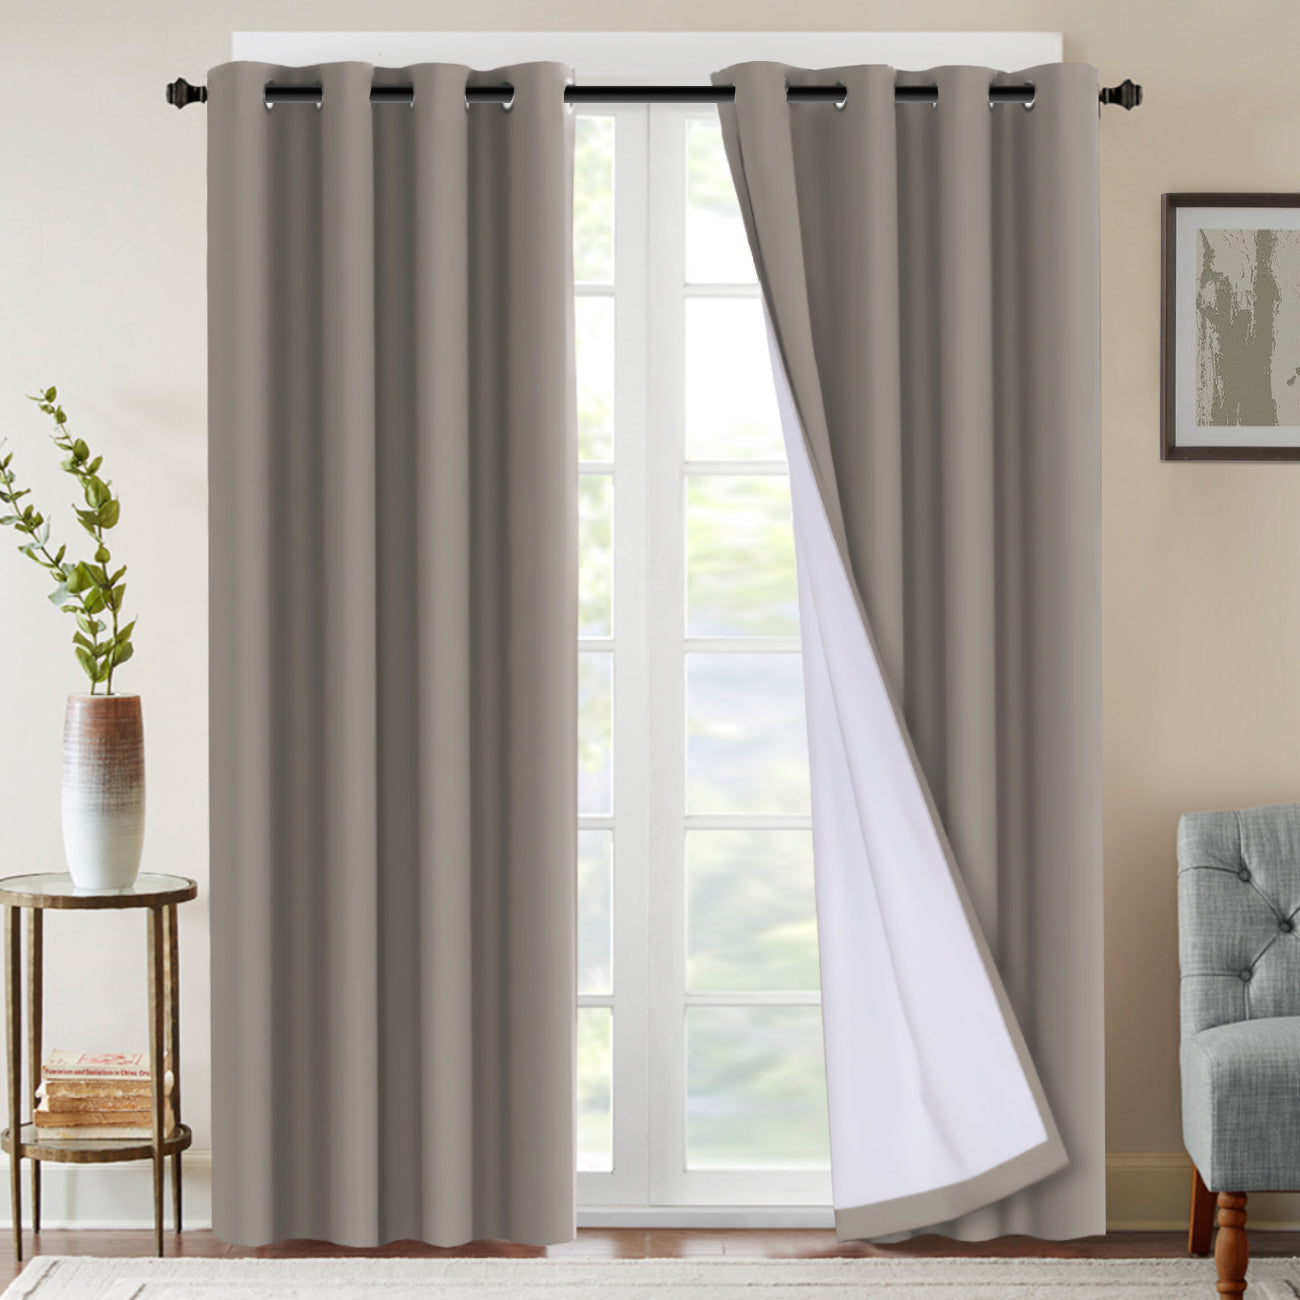 100% Blackout Curtains Full Light Blocking Curtain Draperies for Bedroom/Living Room 52'' x 84''